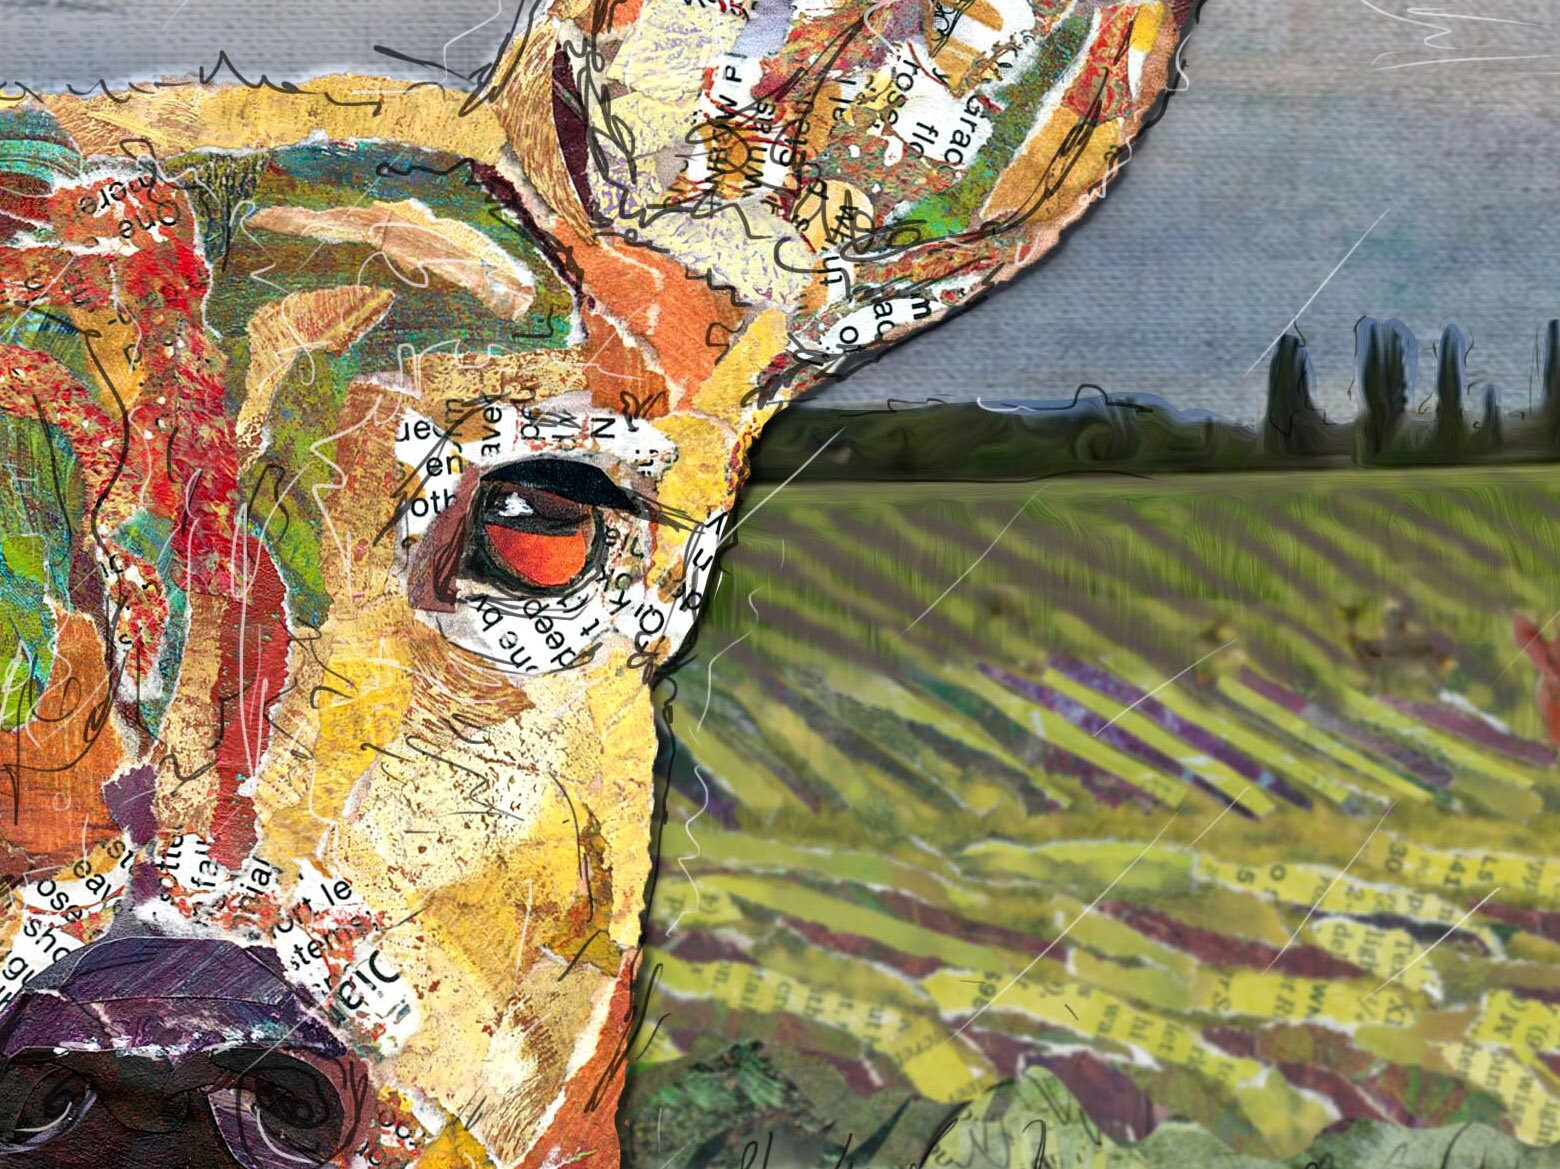 Greeting Card of a Paper Collage of a deer face close up with others browsing in the rain behind - Blank Inside